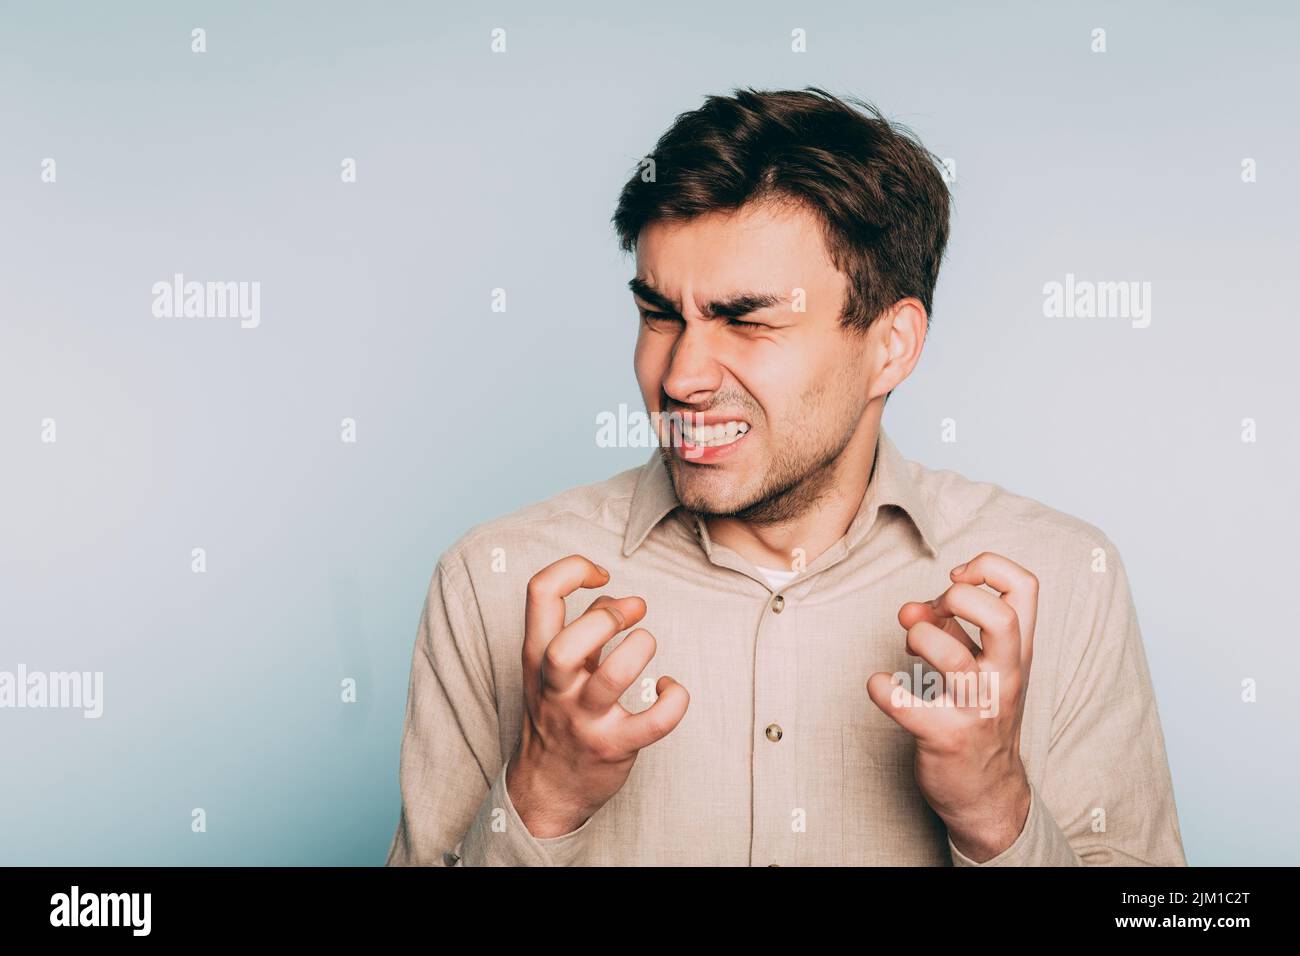 uncontrollable anger helplessness despair man face Stock Photo